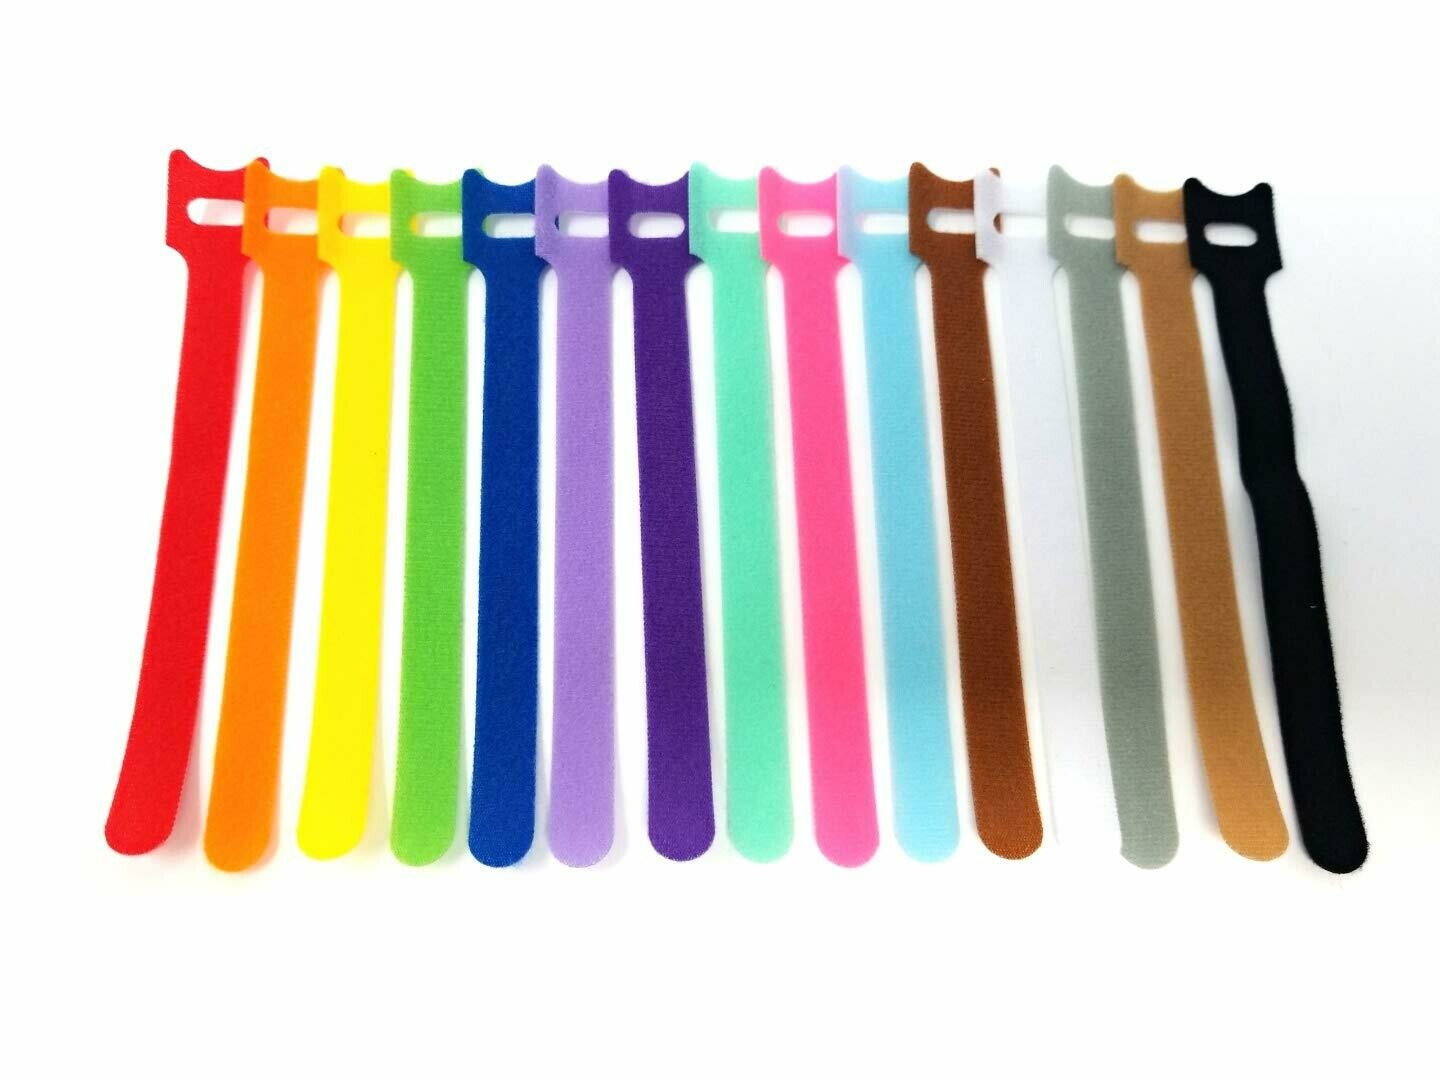 Tag-A-Room Color Coded Reusable Fastening Cable Ties/Organizer, Cable Straps, Hook and Loop Microfiber 6 Inch (60 Count)